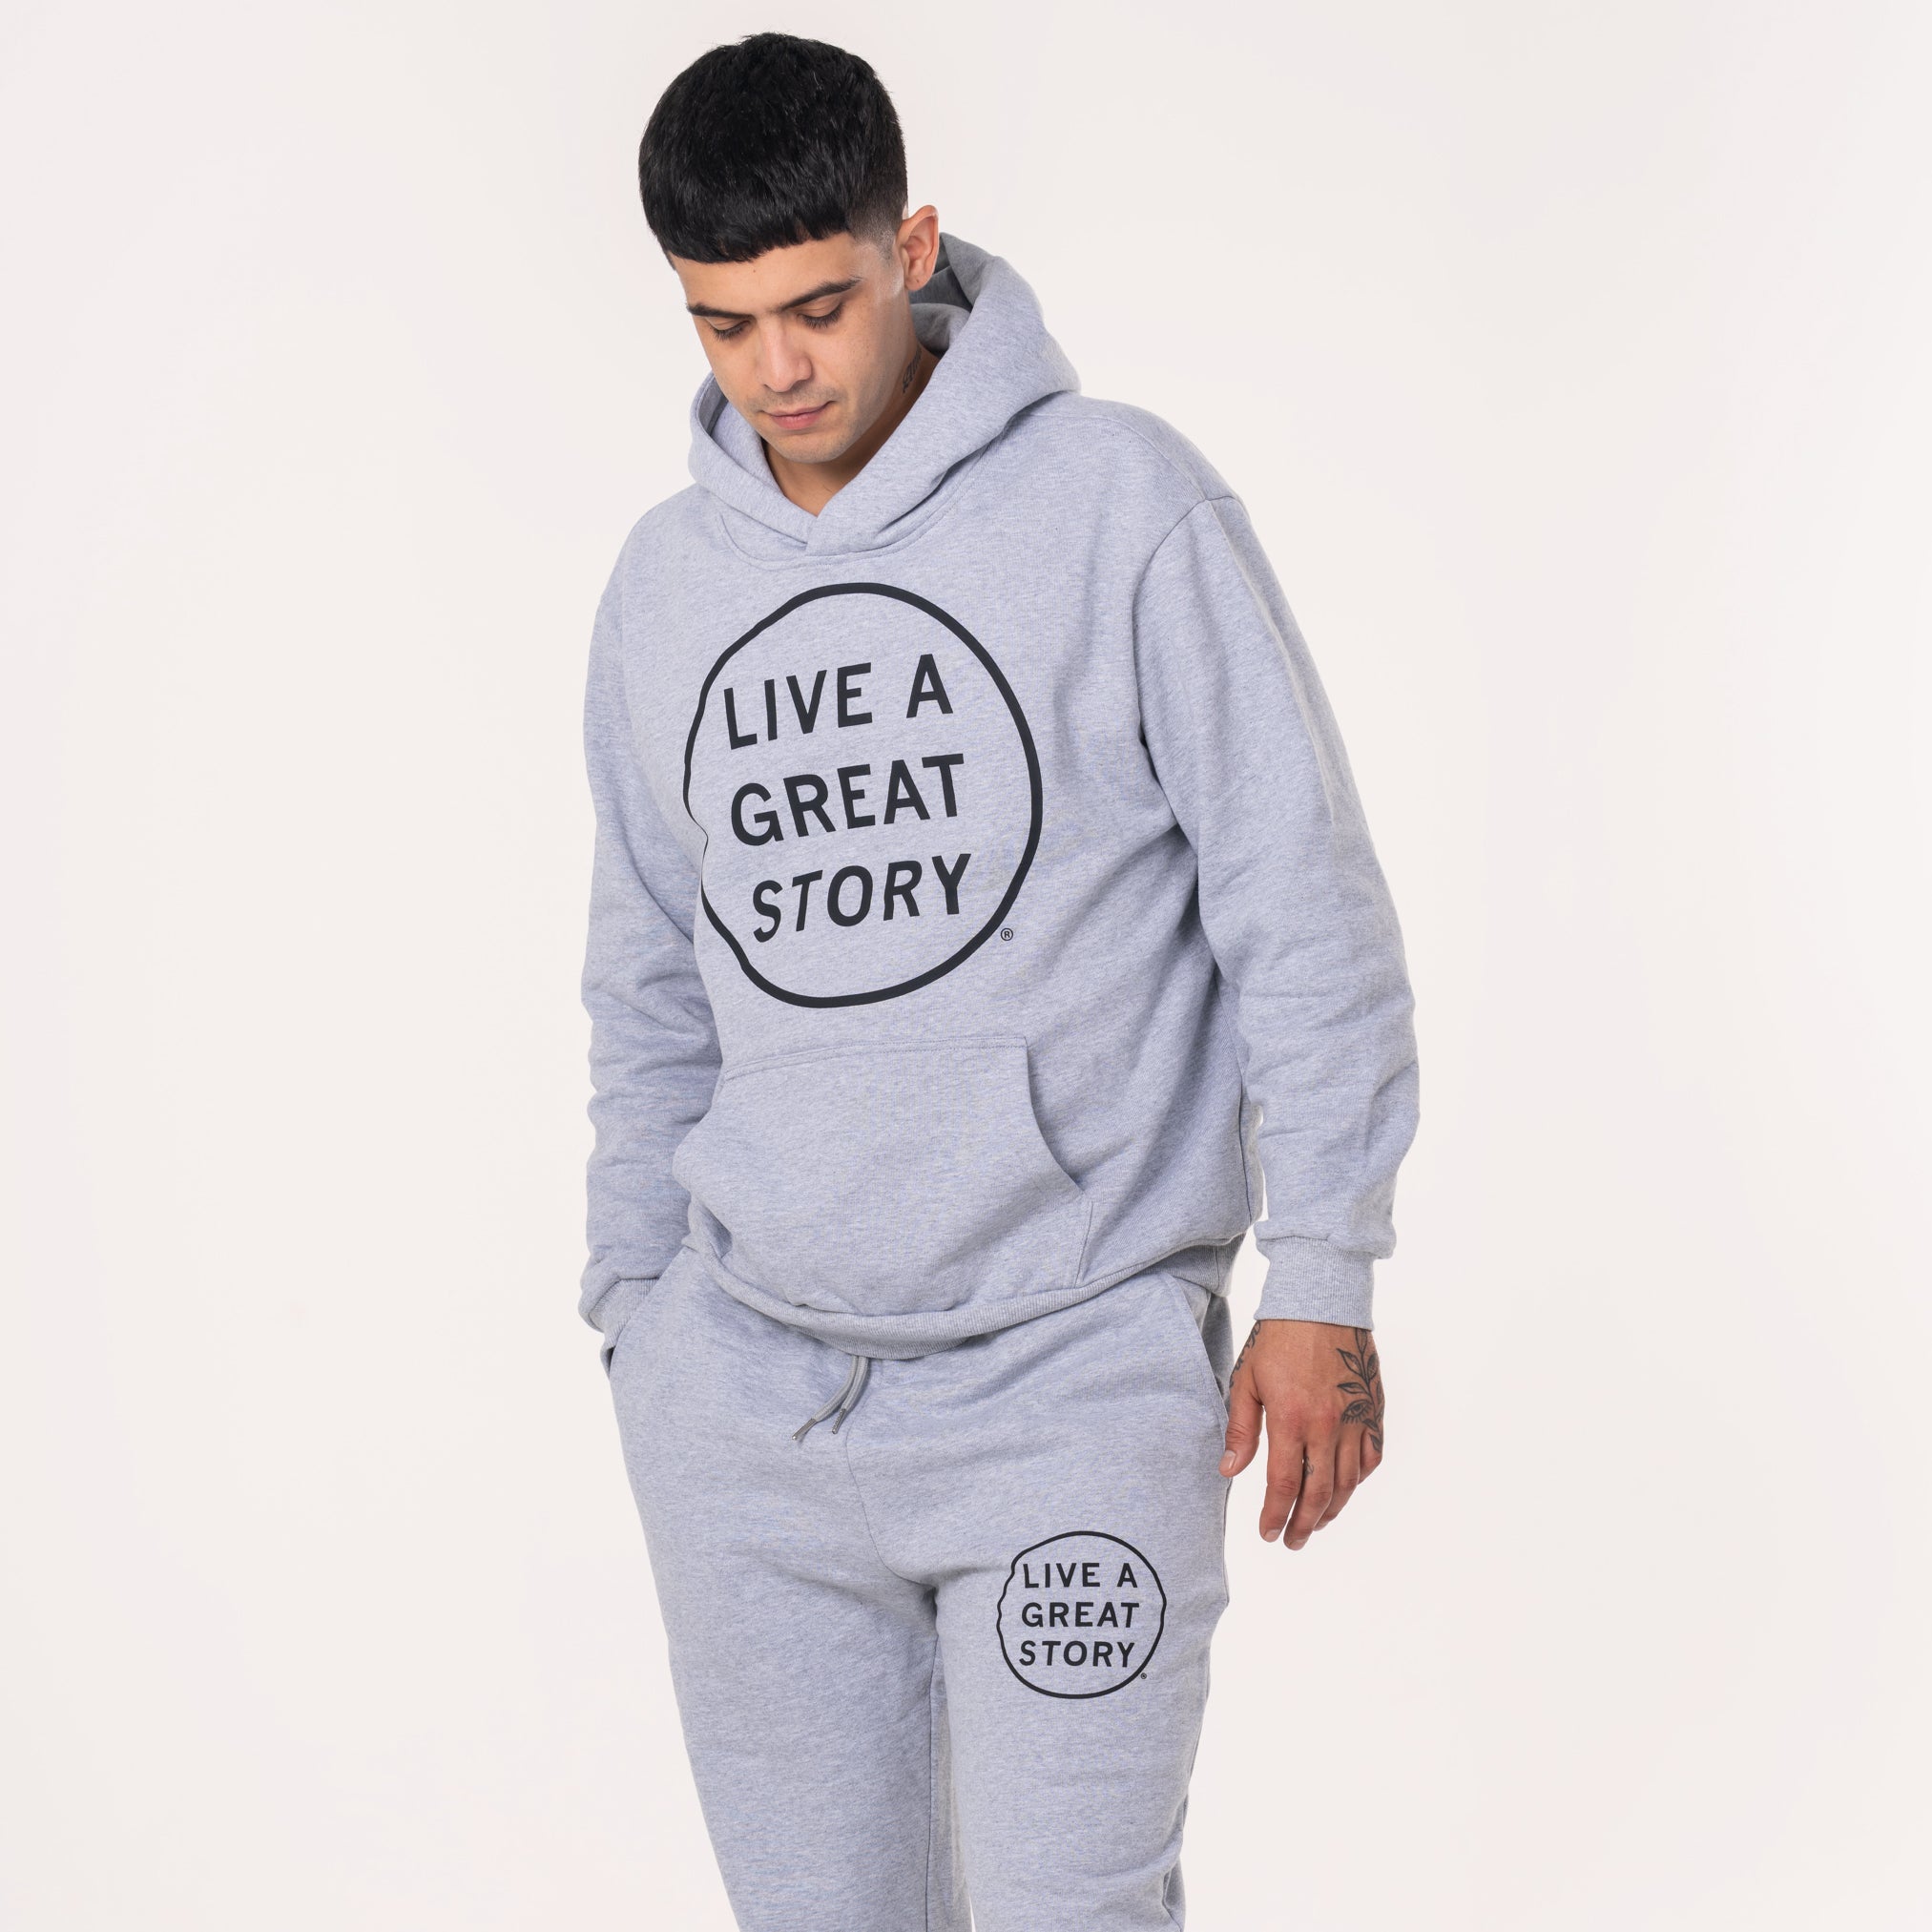 A person wearing a light gray LIVE A GREAT STORY original 100% cotton hoodie